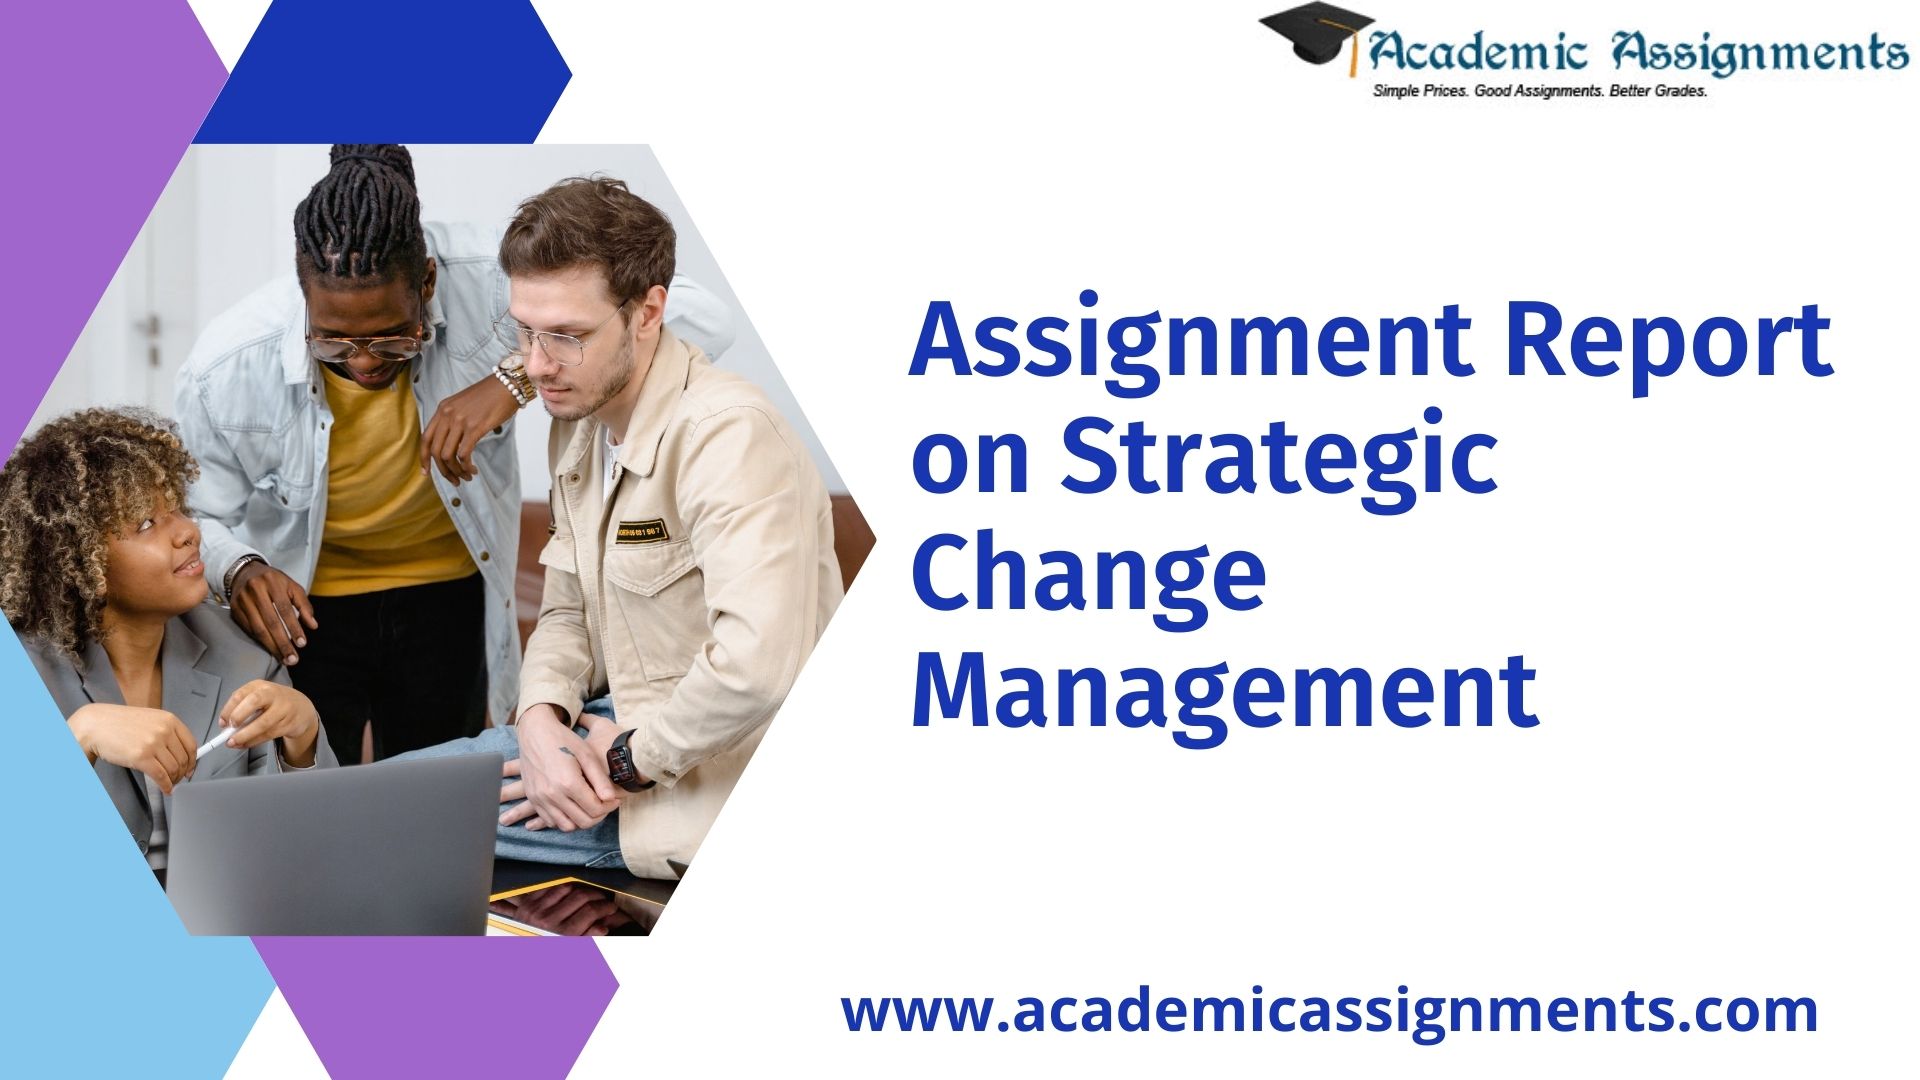 Assignment Report on Strategic Change Management